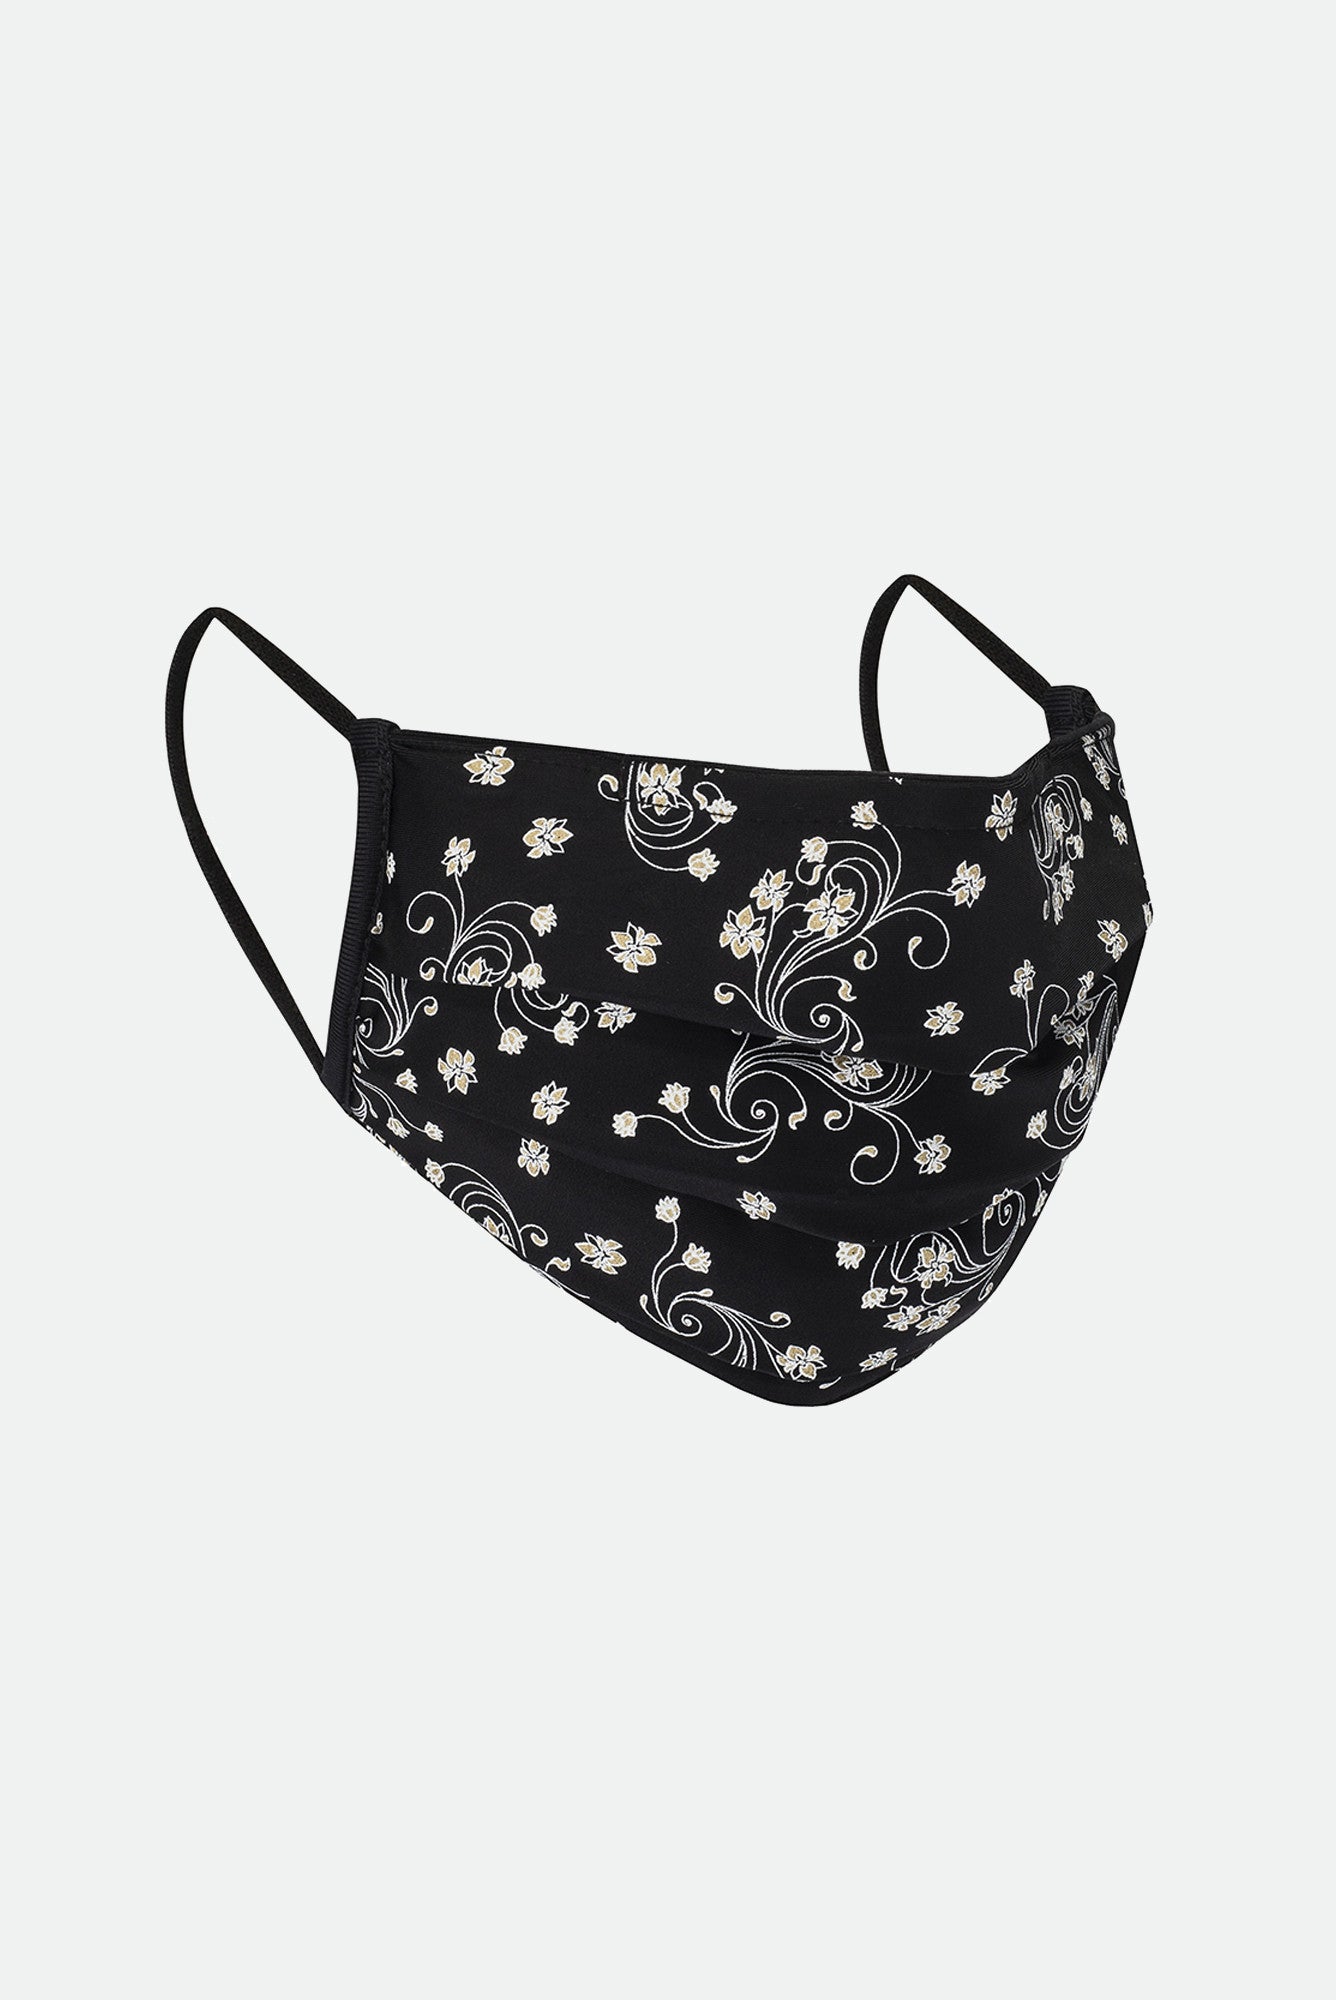 Wear Moi Microfibre and Cotton Mask - Ladies